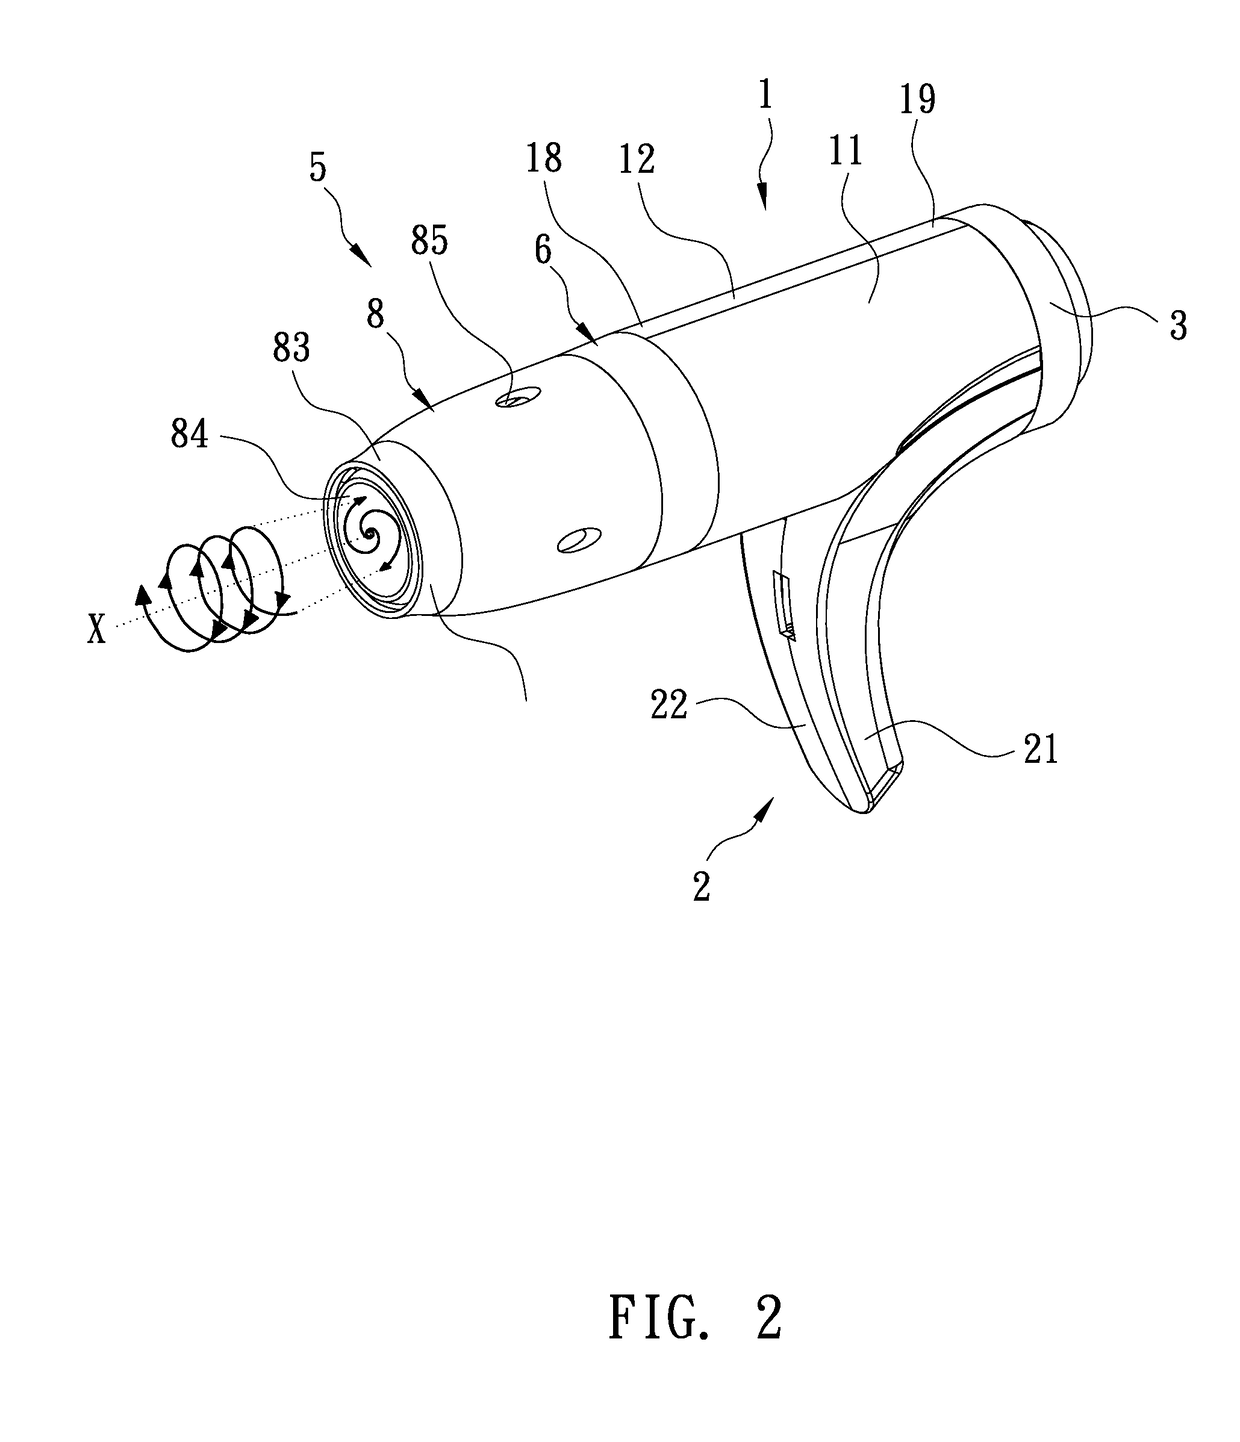 Hair dryer with improved outlet unit